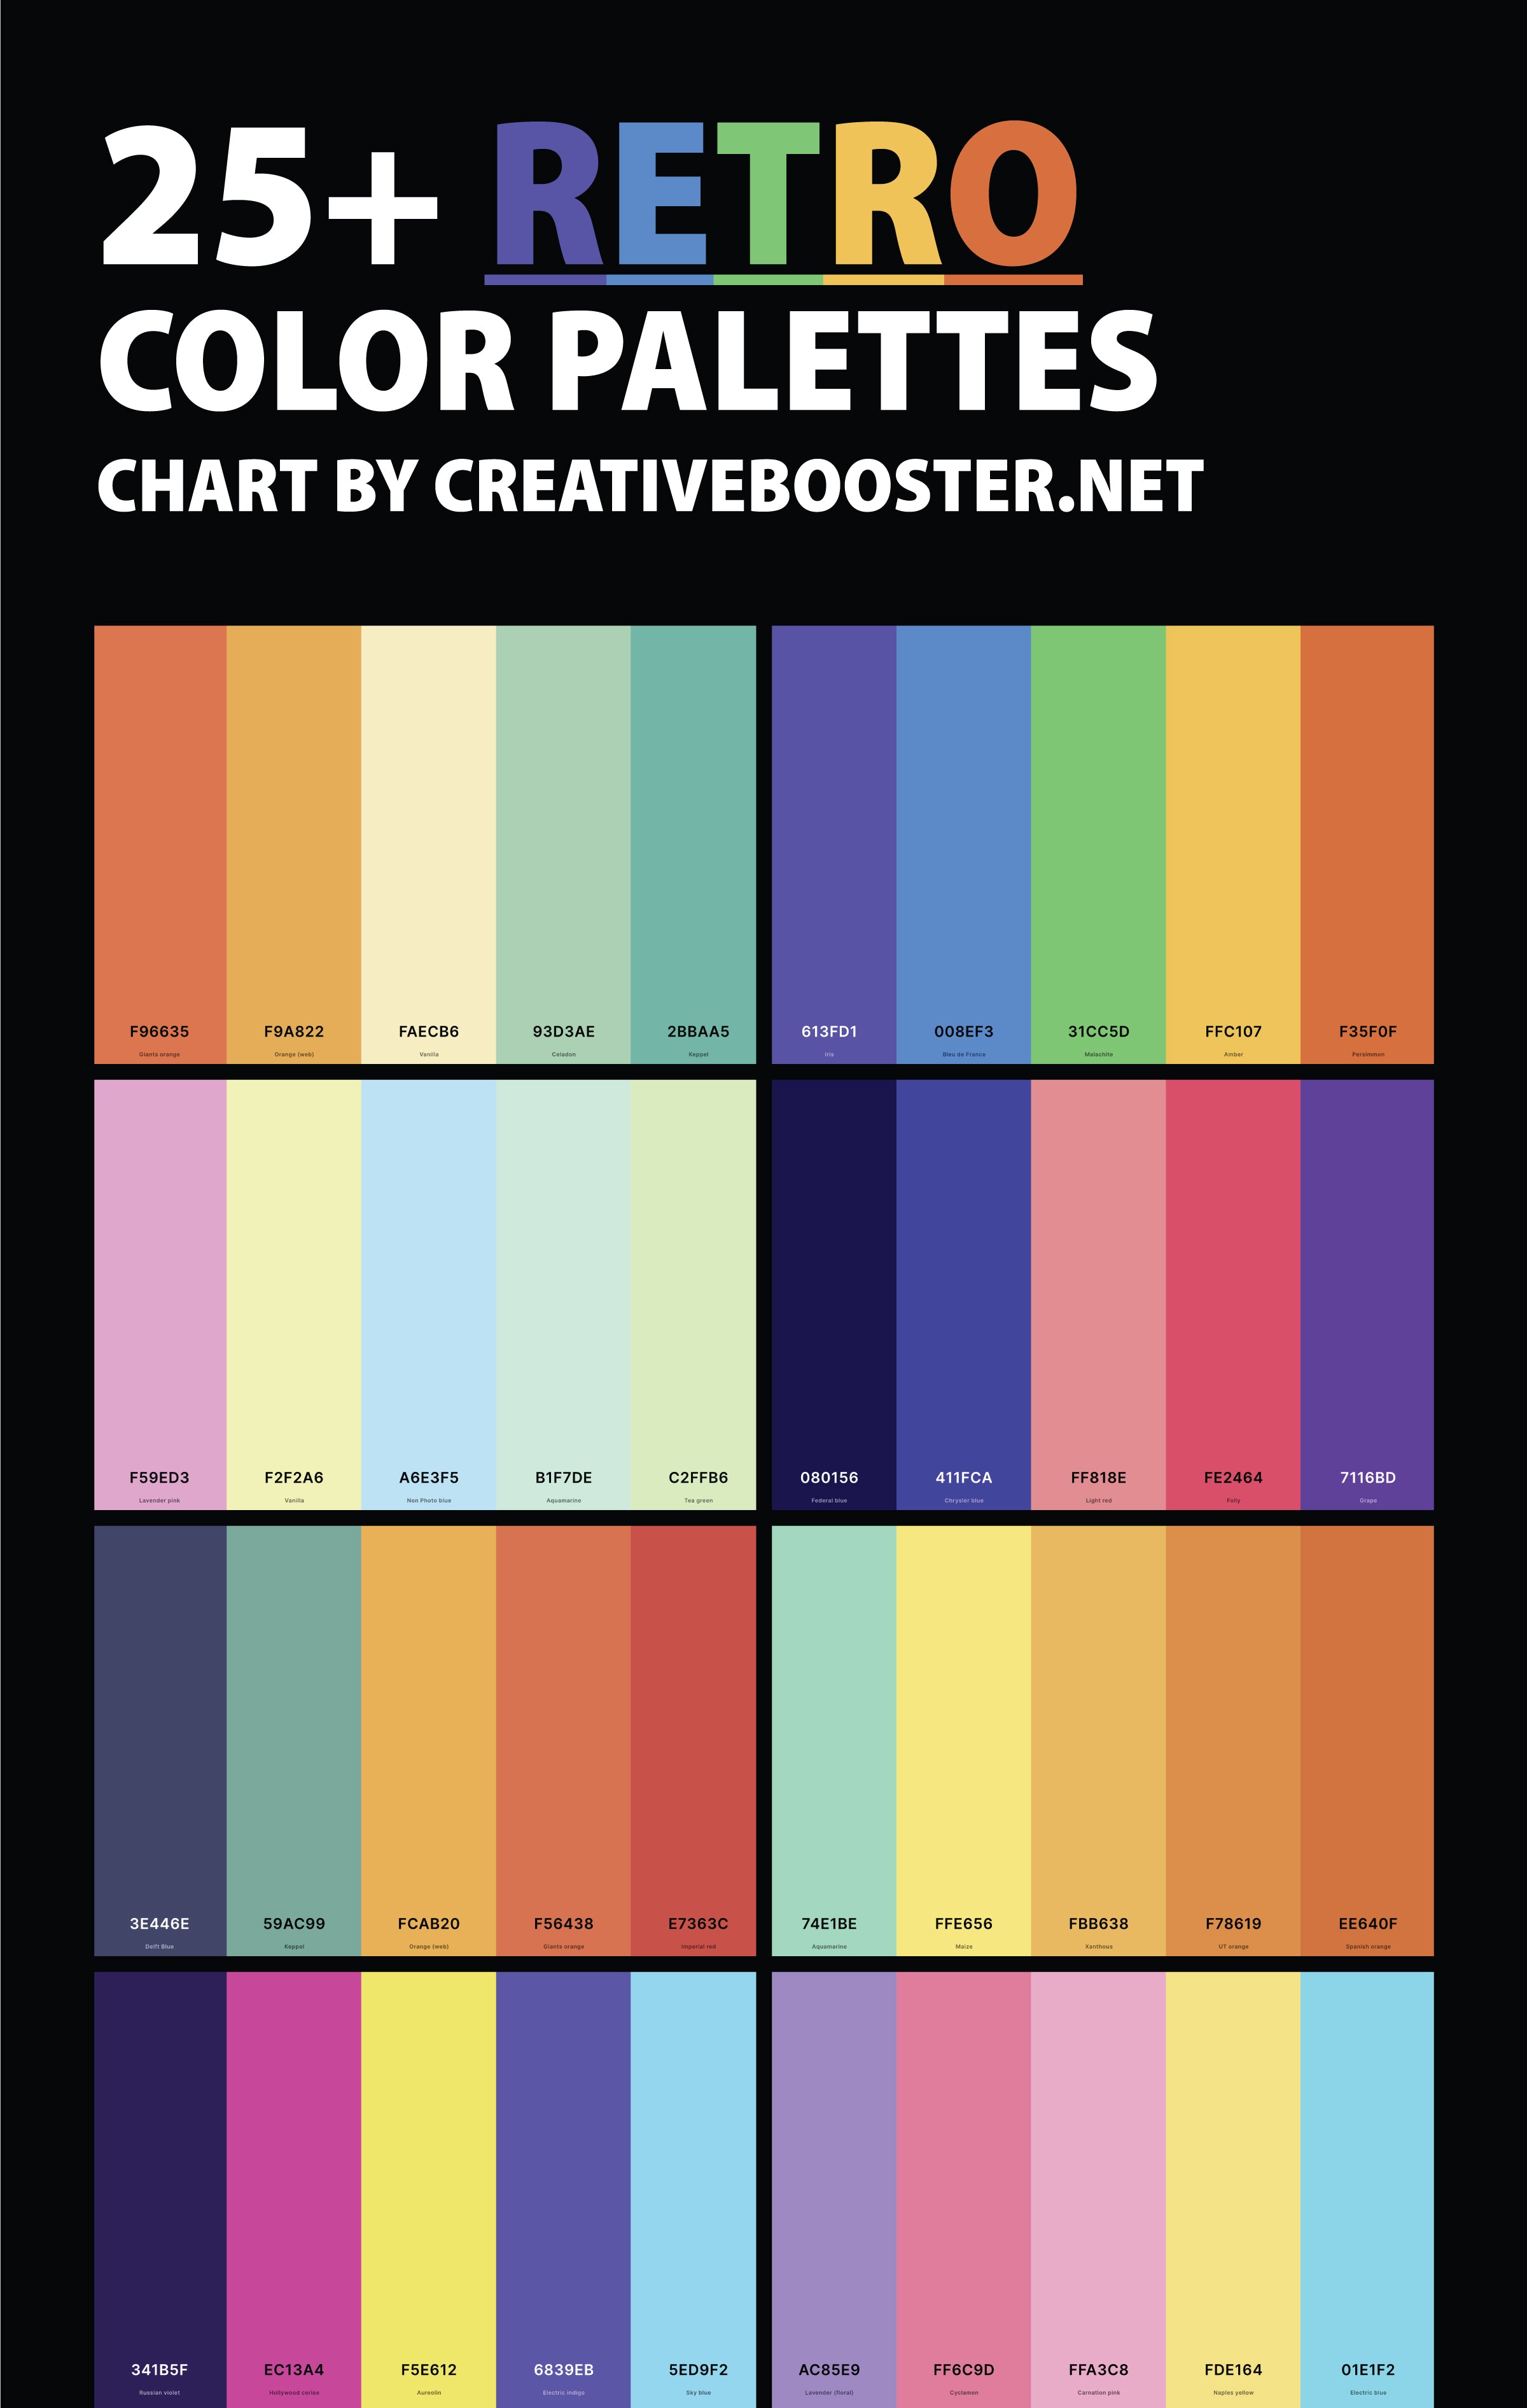 retro-color-palettes-chart-with-names-and-hex-codes-pinterest